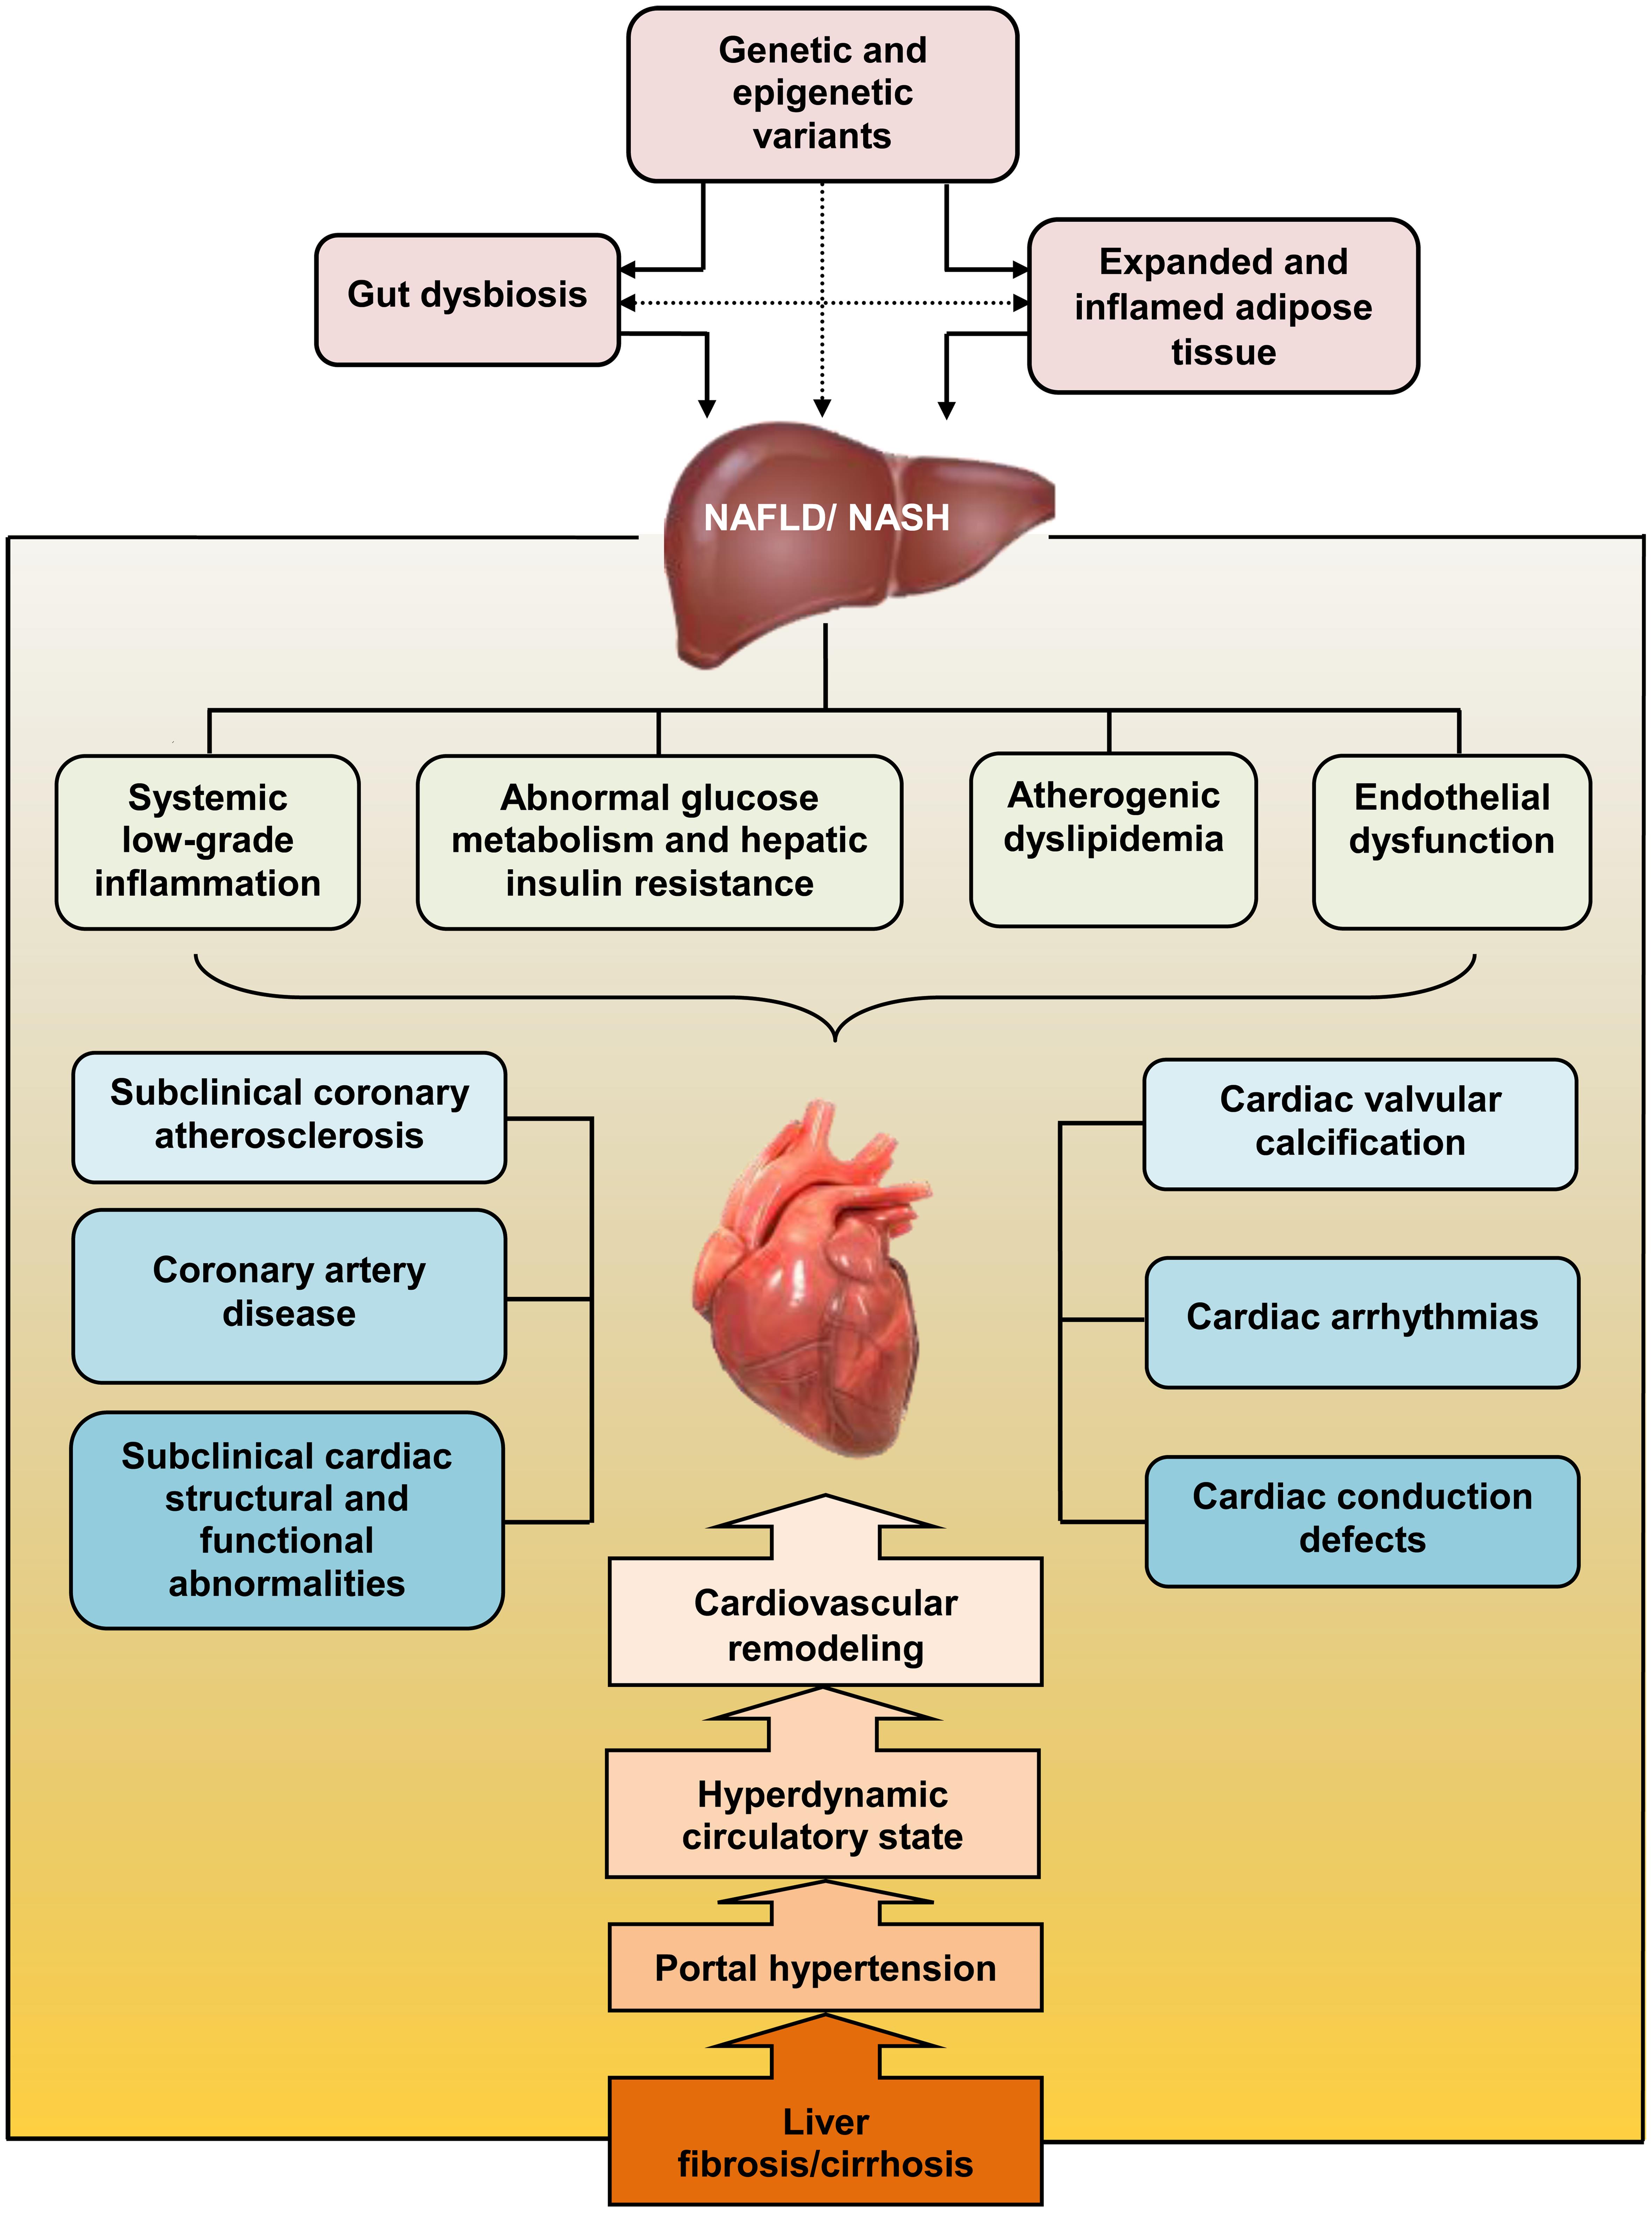 Potential pathophysiological mechanisms of cardiovascular disorders in non-alcoholic fatty liver disease.